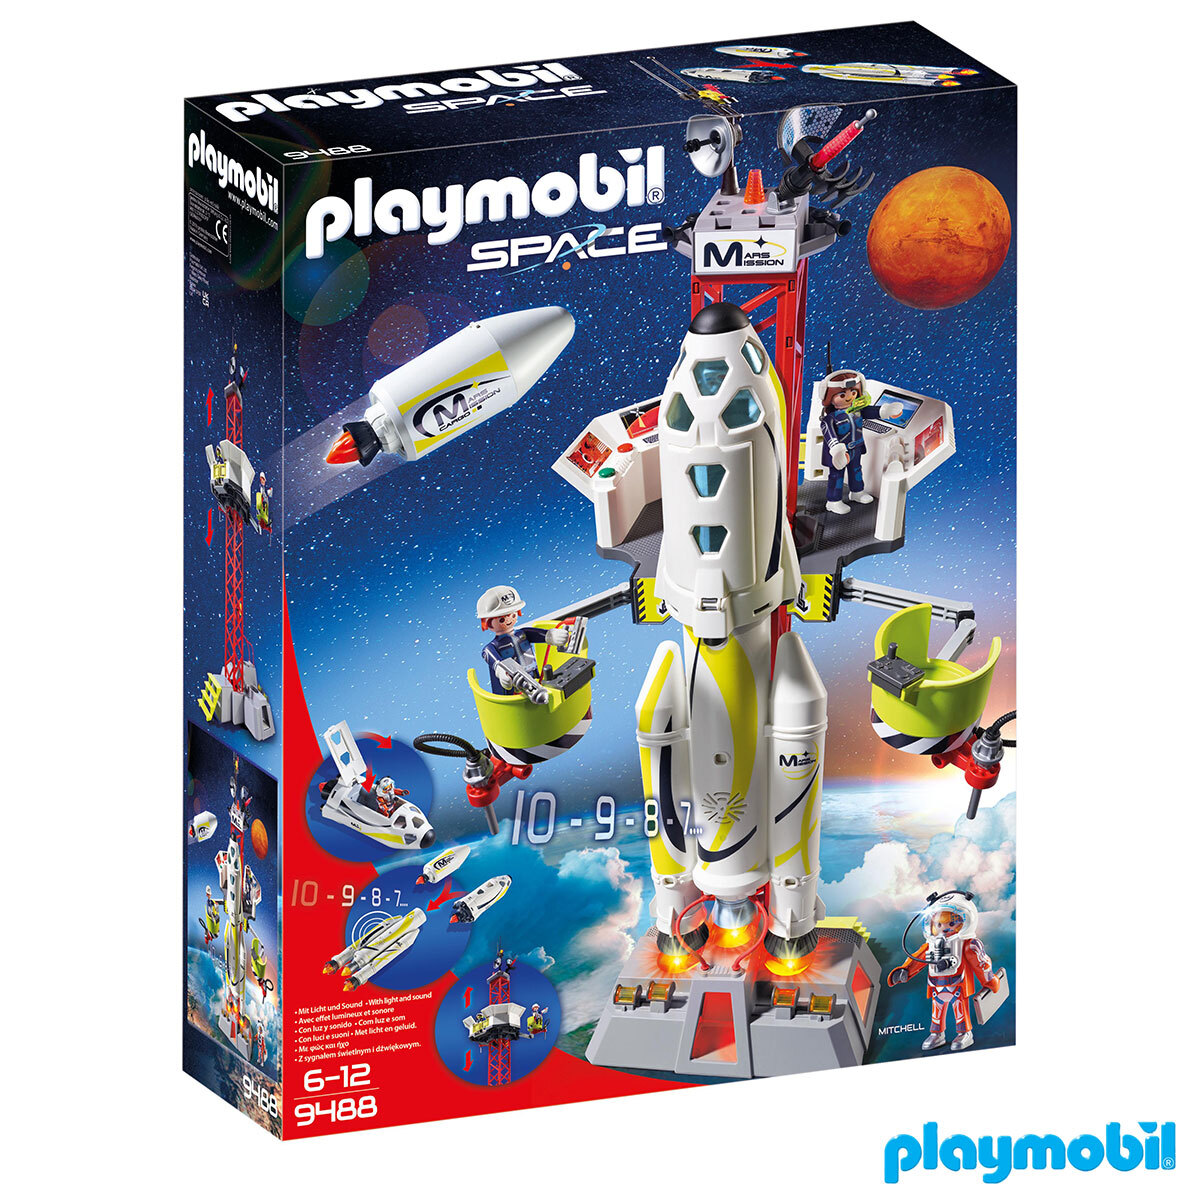 Buy Playmobil Space Mission Rocket 9488 Box Image at Costco.co.uk